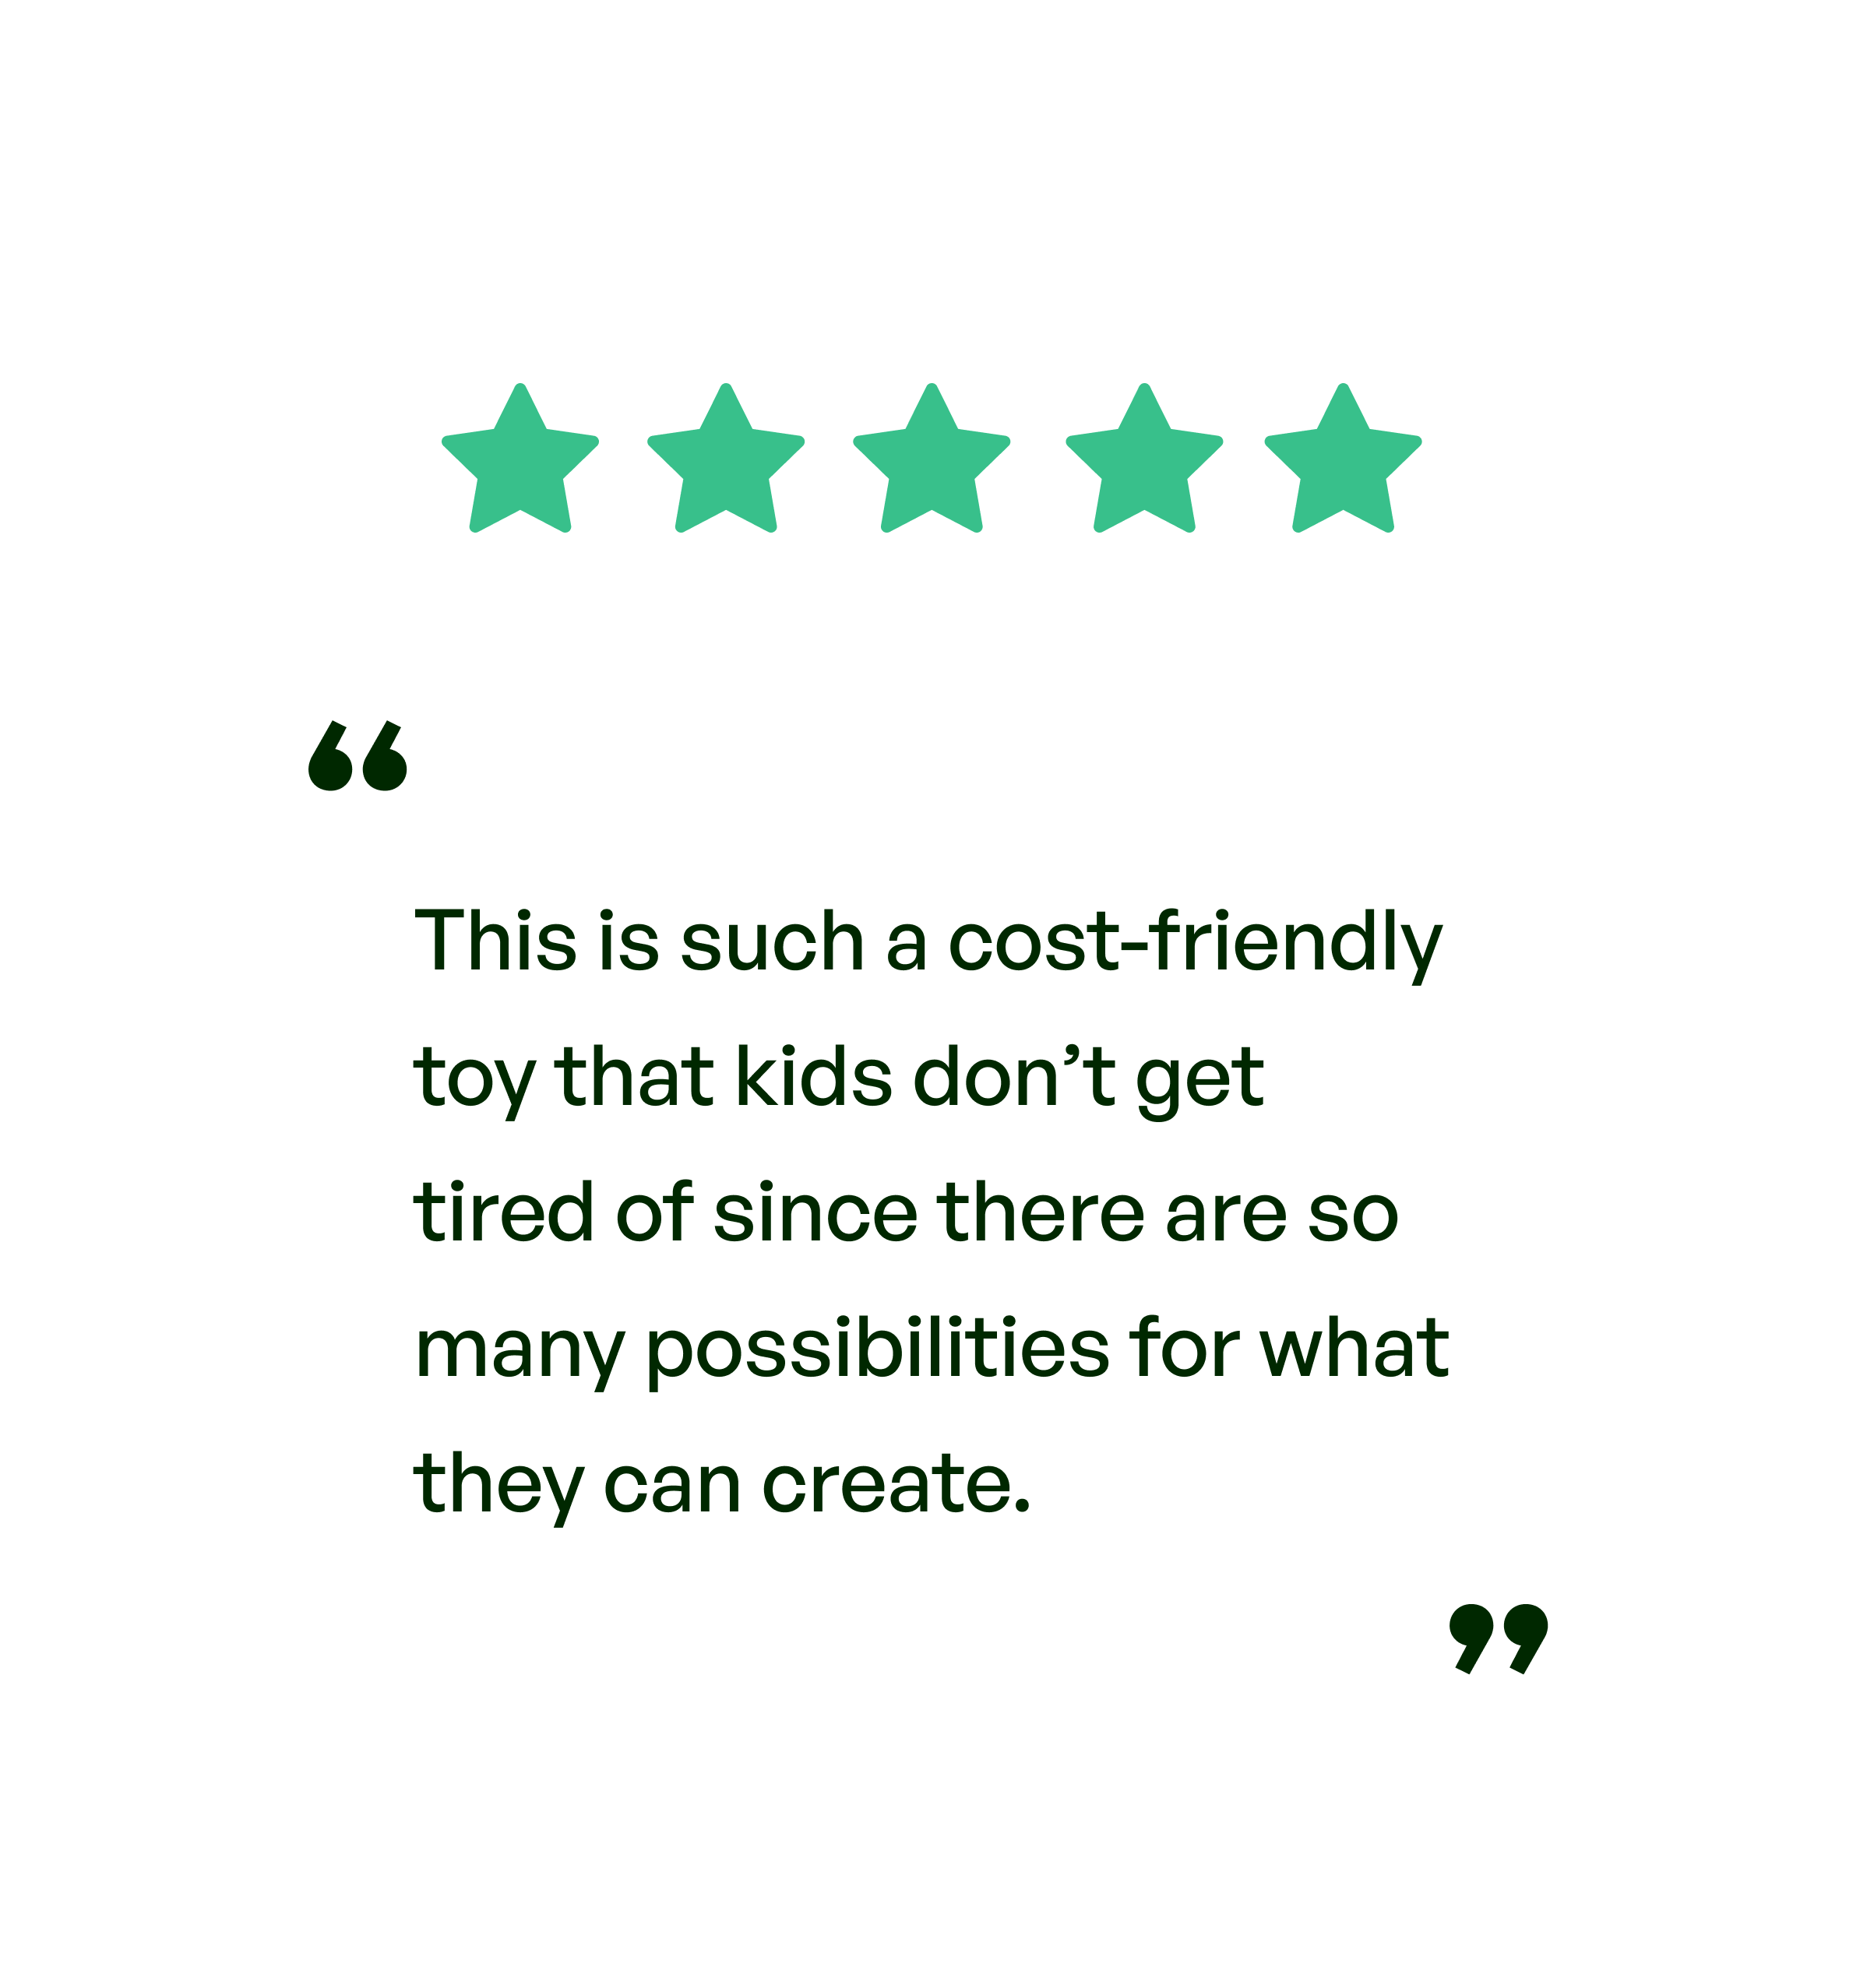 Five stars. Testimonial: This is such a cost-friendly toy that kids don't get tired of since there are so many possibilities for what they can create.